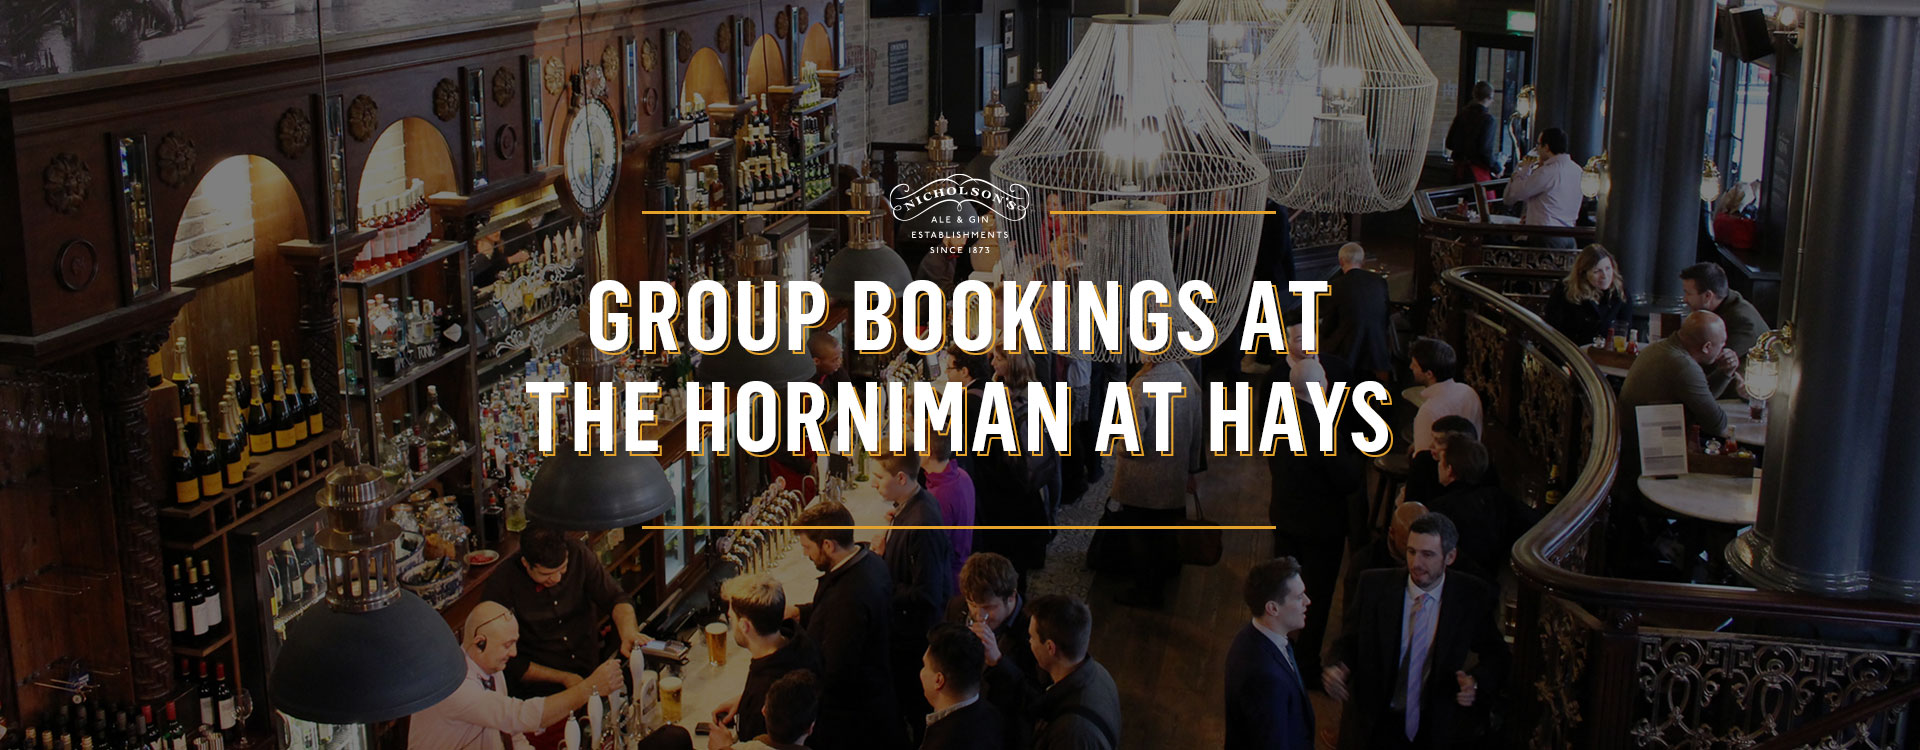 Group Bookings at The Horniman at Hays